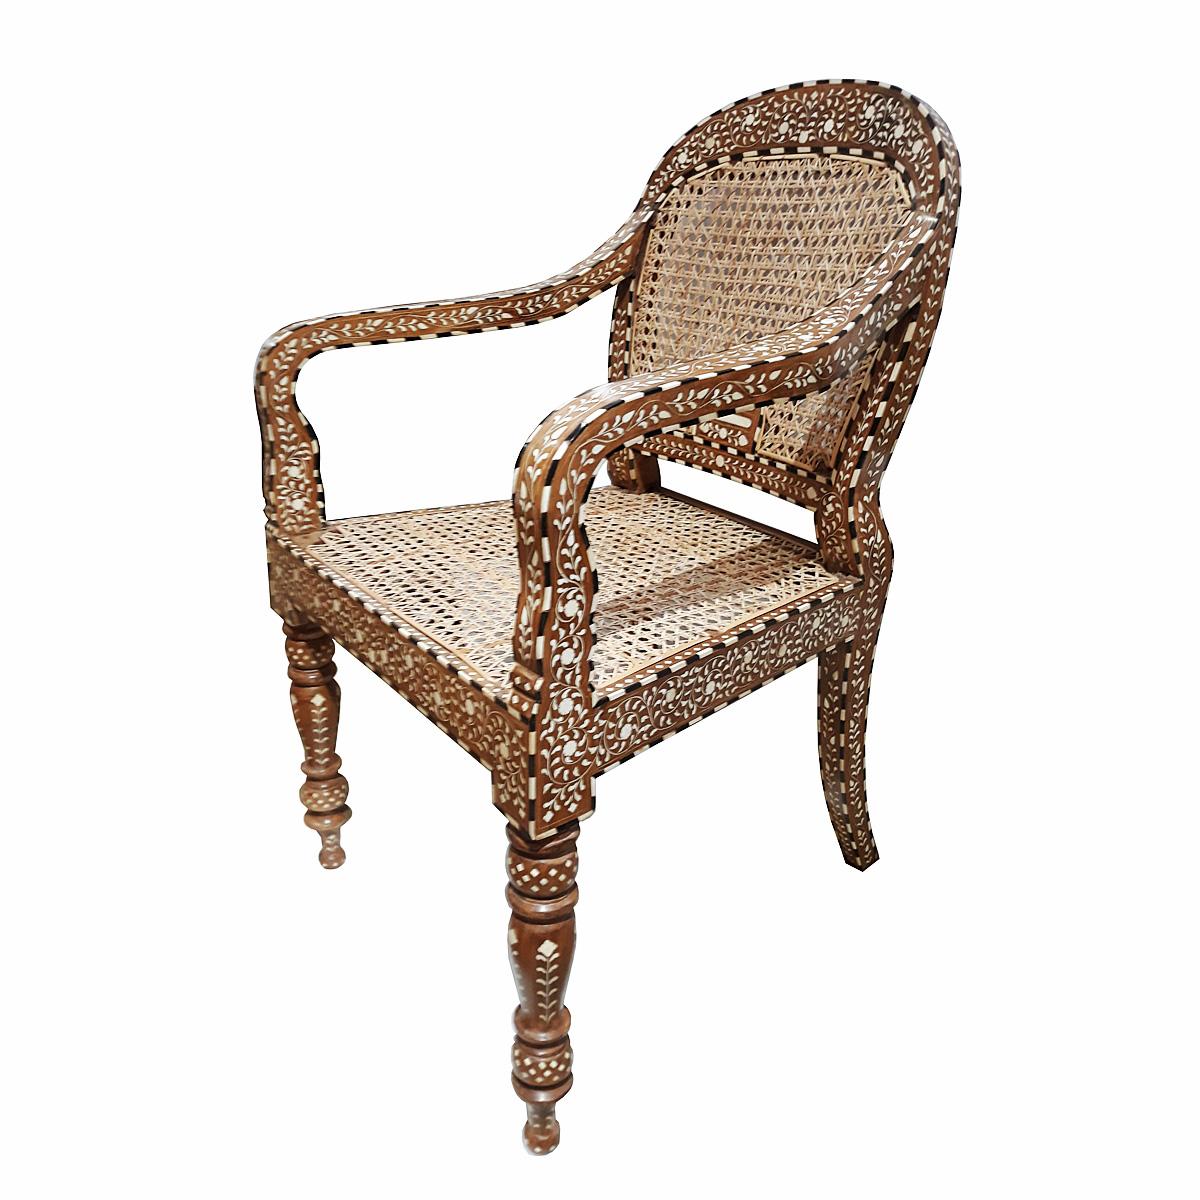 A beautiful armchair, handcrafted in India out of aged and naturally seasoned teak wood, inlaid with cruelty-free sourced bone and artisanally weaved cane. 

Inlay is ancient decorative technique that involves embedding delicate, hand-carved pieces